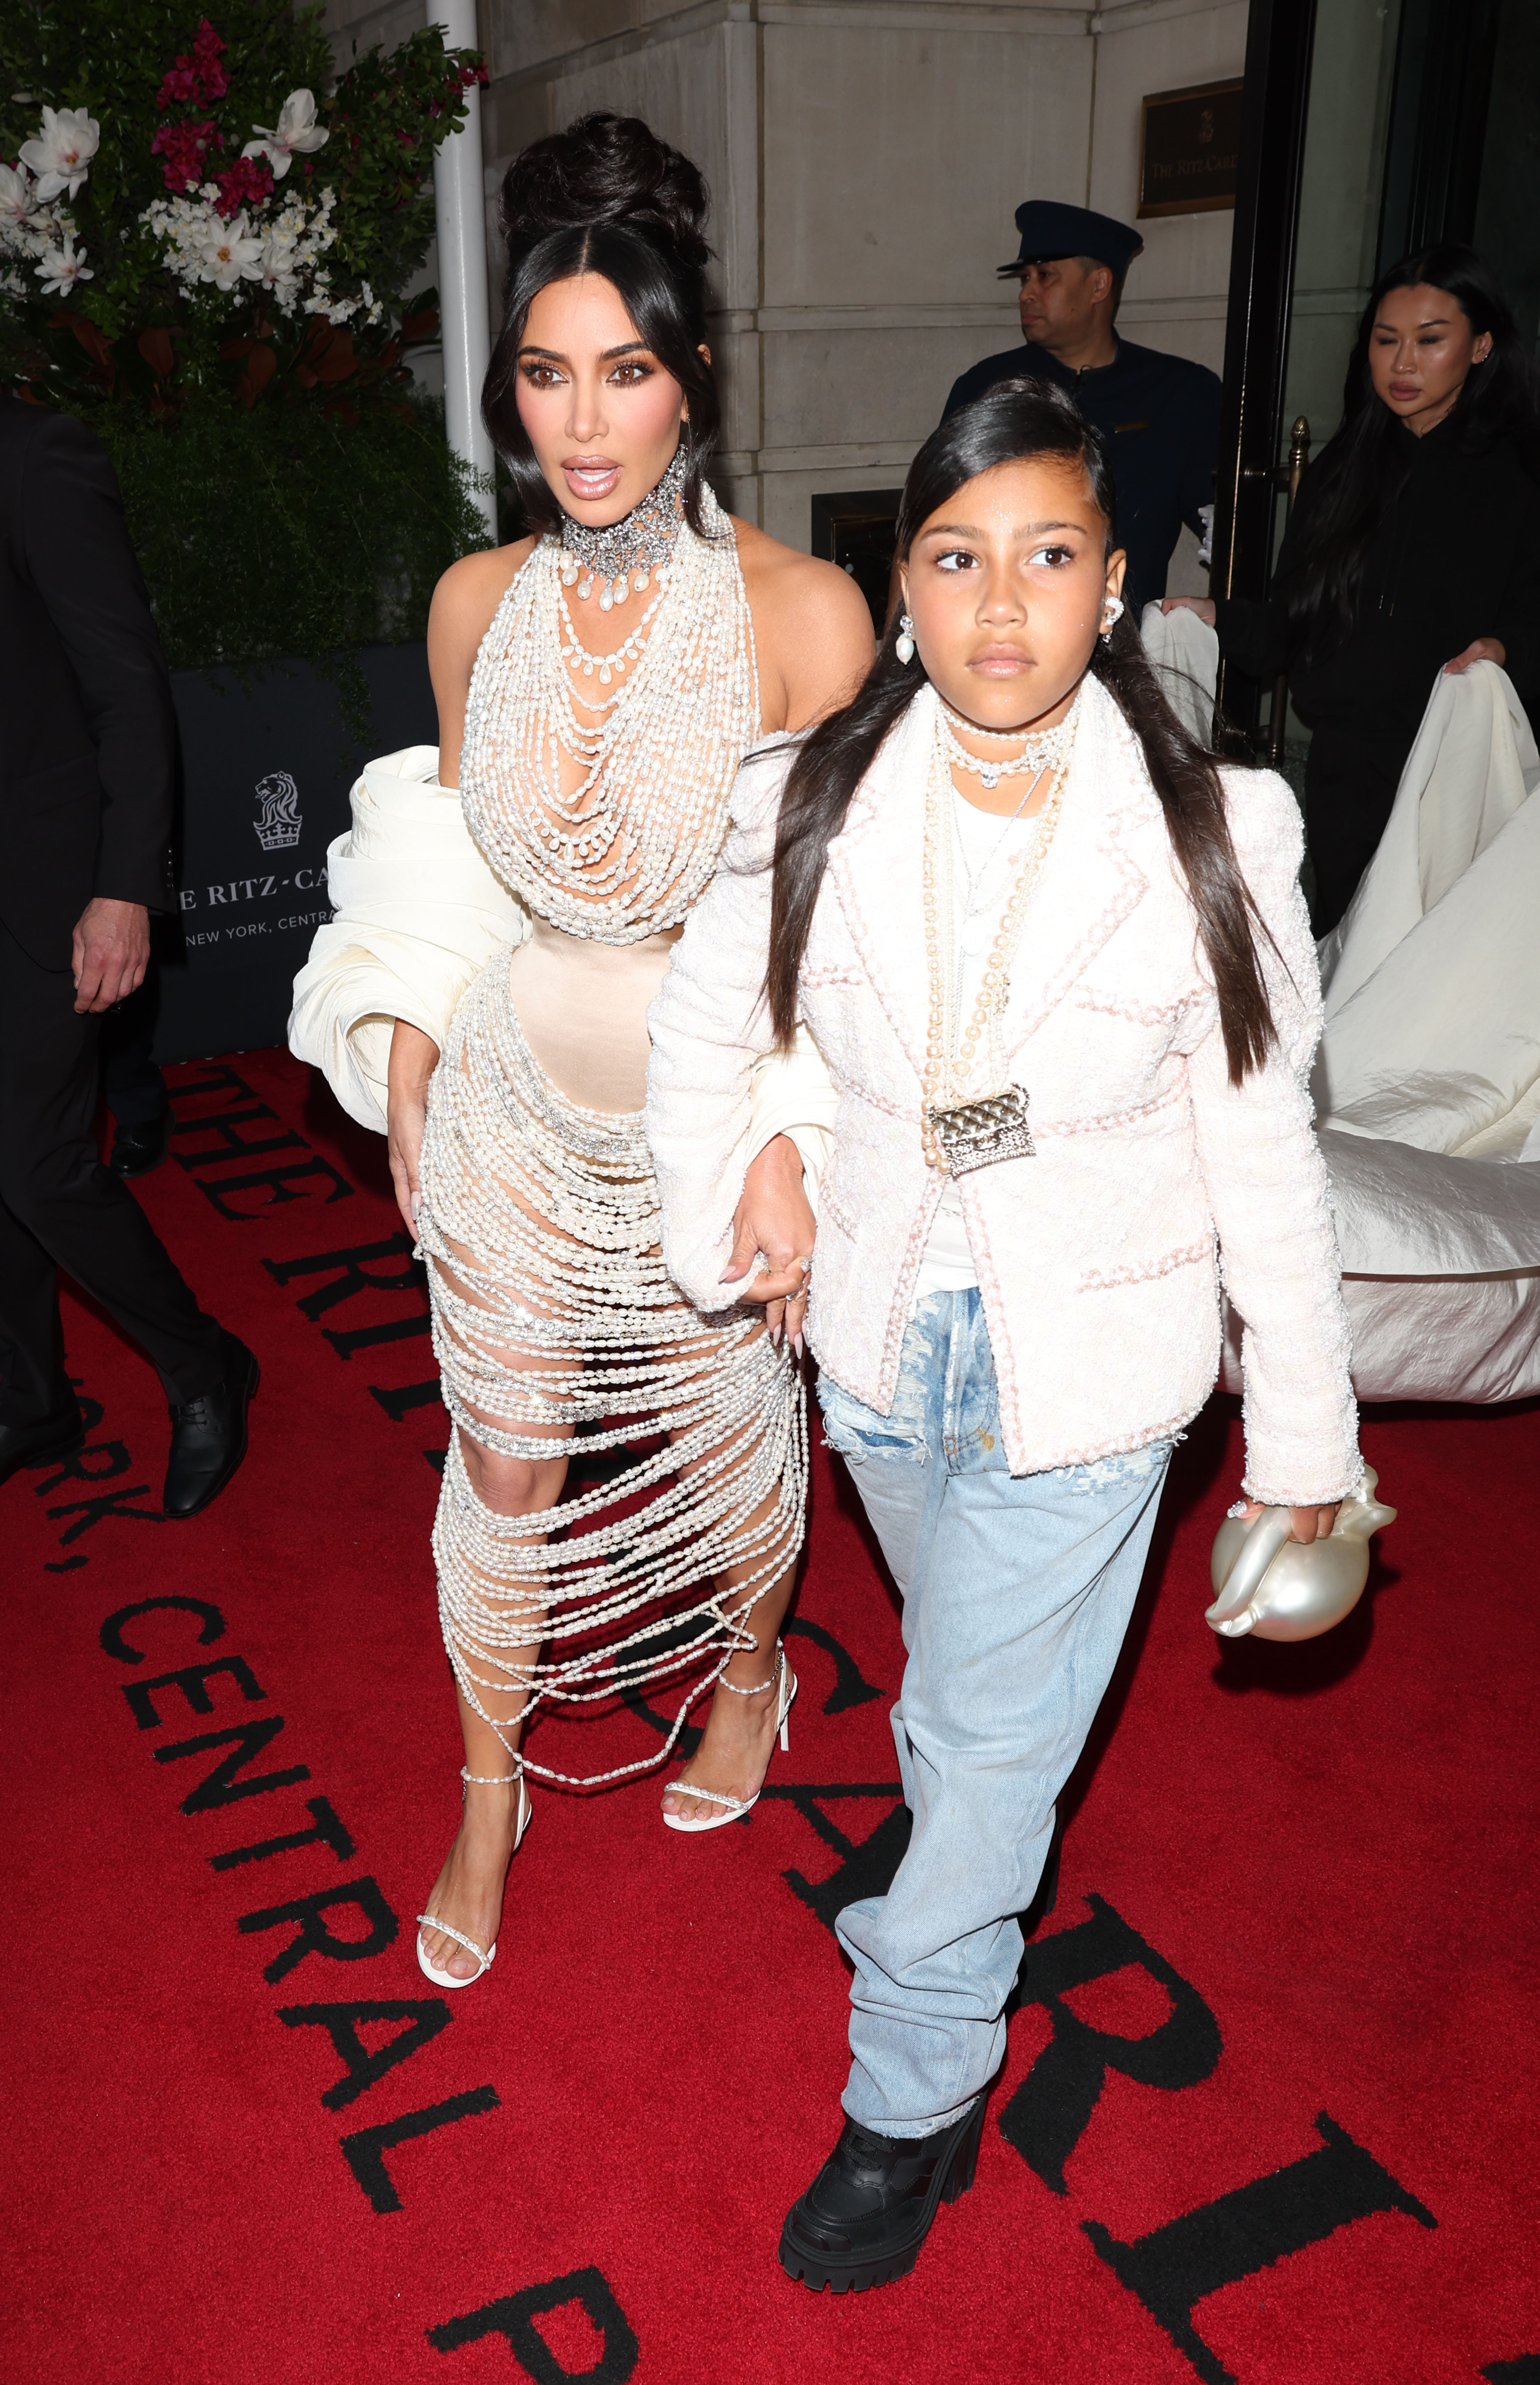 North is the oldest of Kim Kardashian and Kanye West's four children